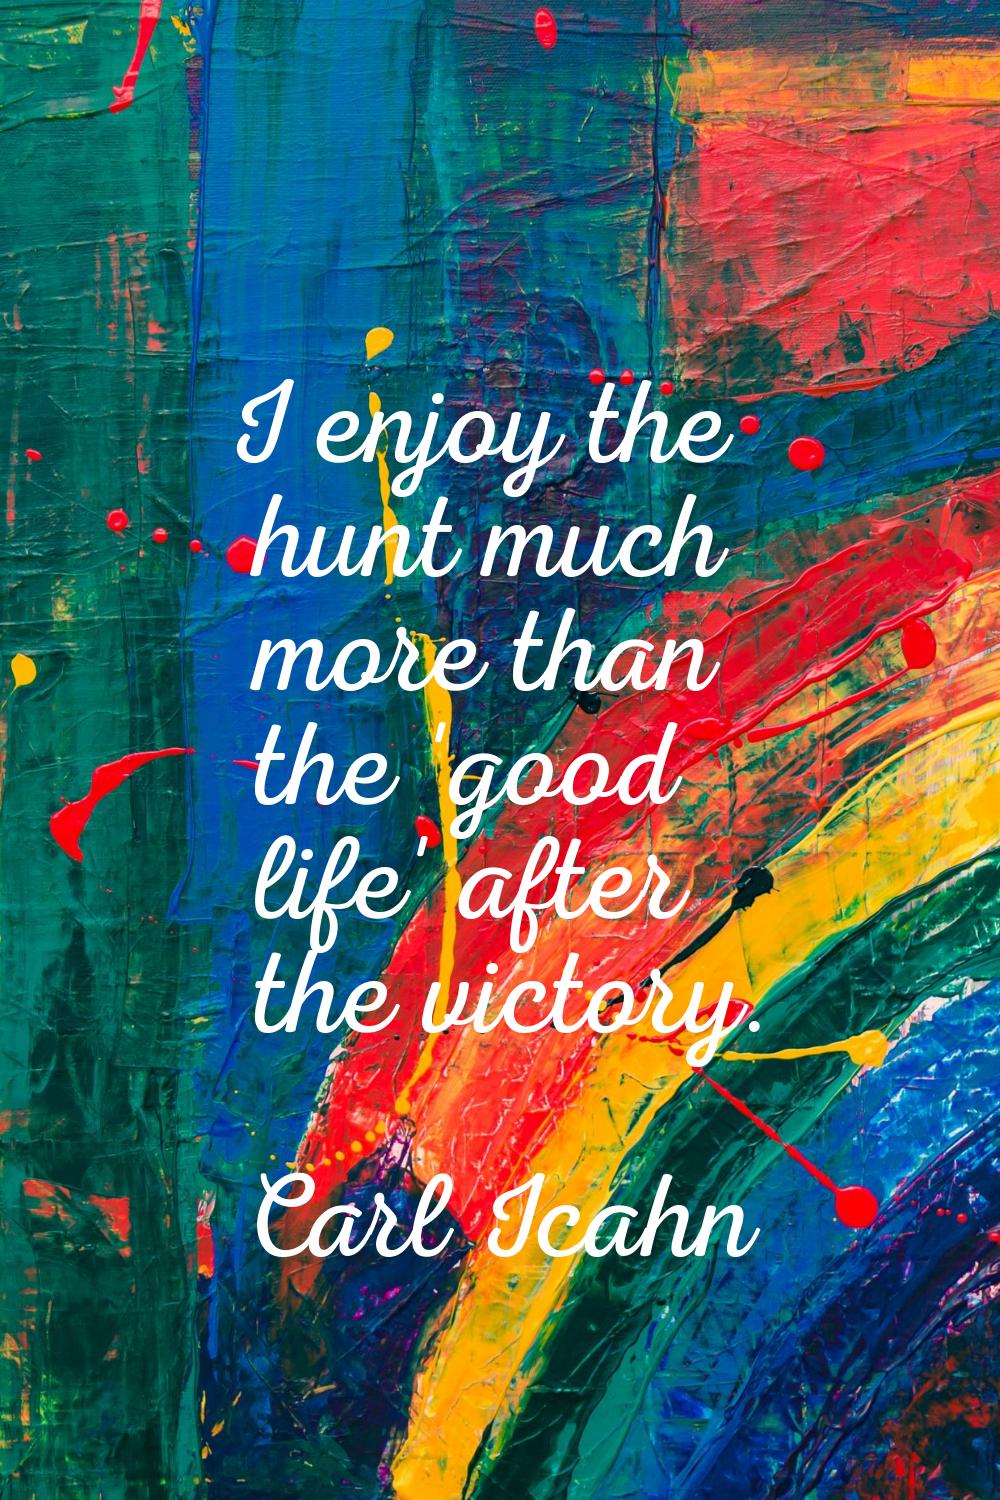 I enjoy the hunt much more than the 'good life' after the victory.